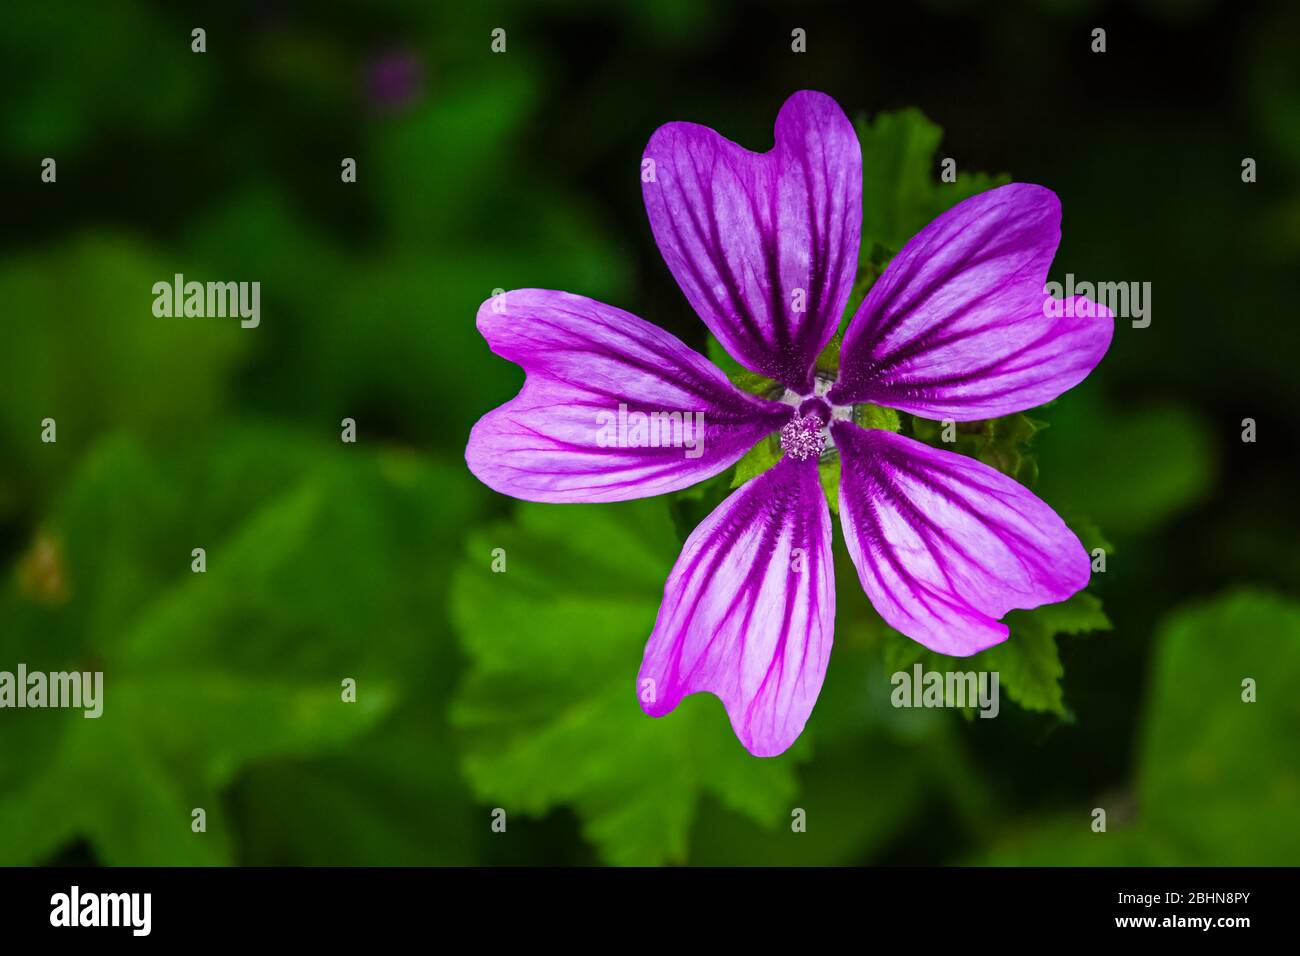 Close up of a purple Malva flower, commonly called mallow. It is a herbaceous annual, biennial, and perennial plant, family Malvaceae. Stock Photo